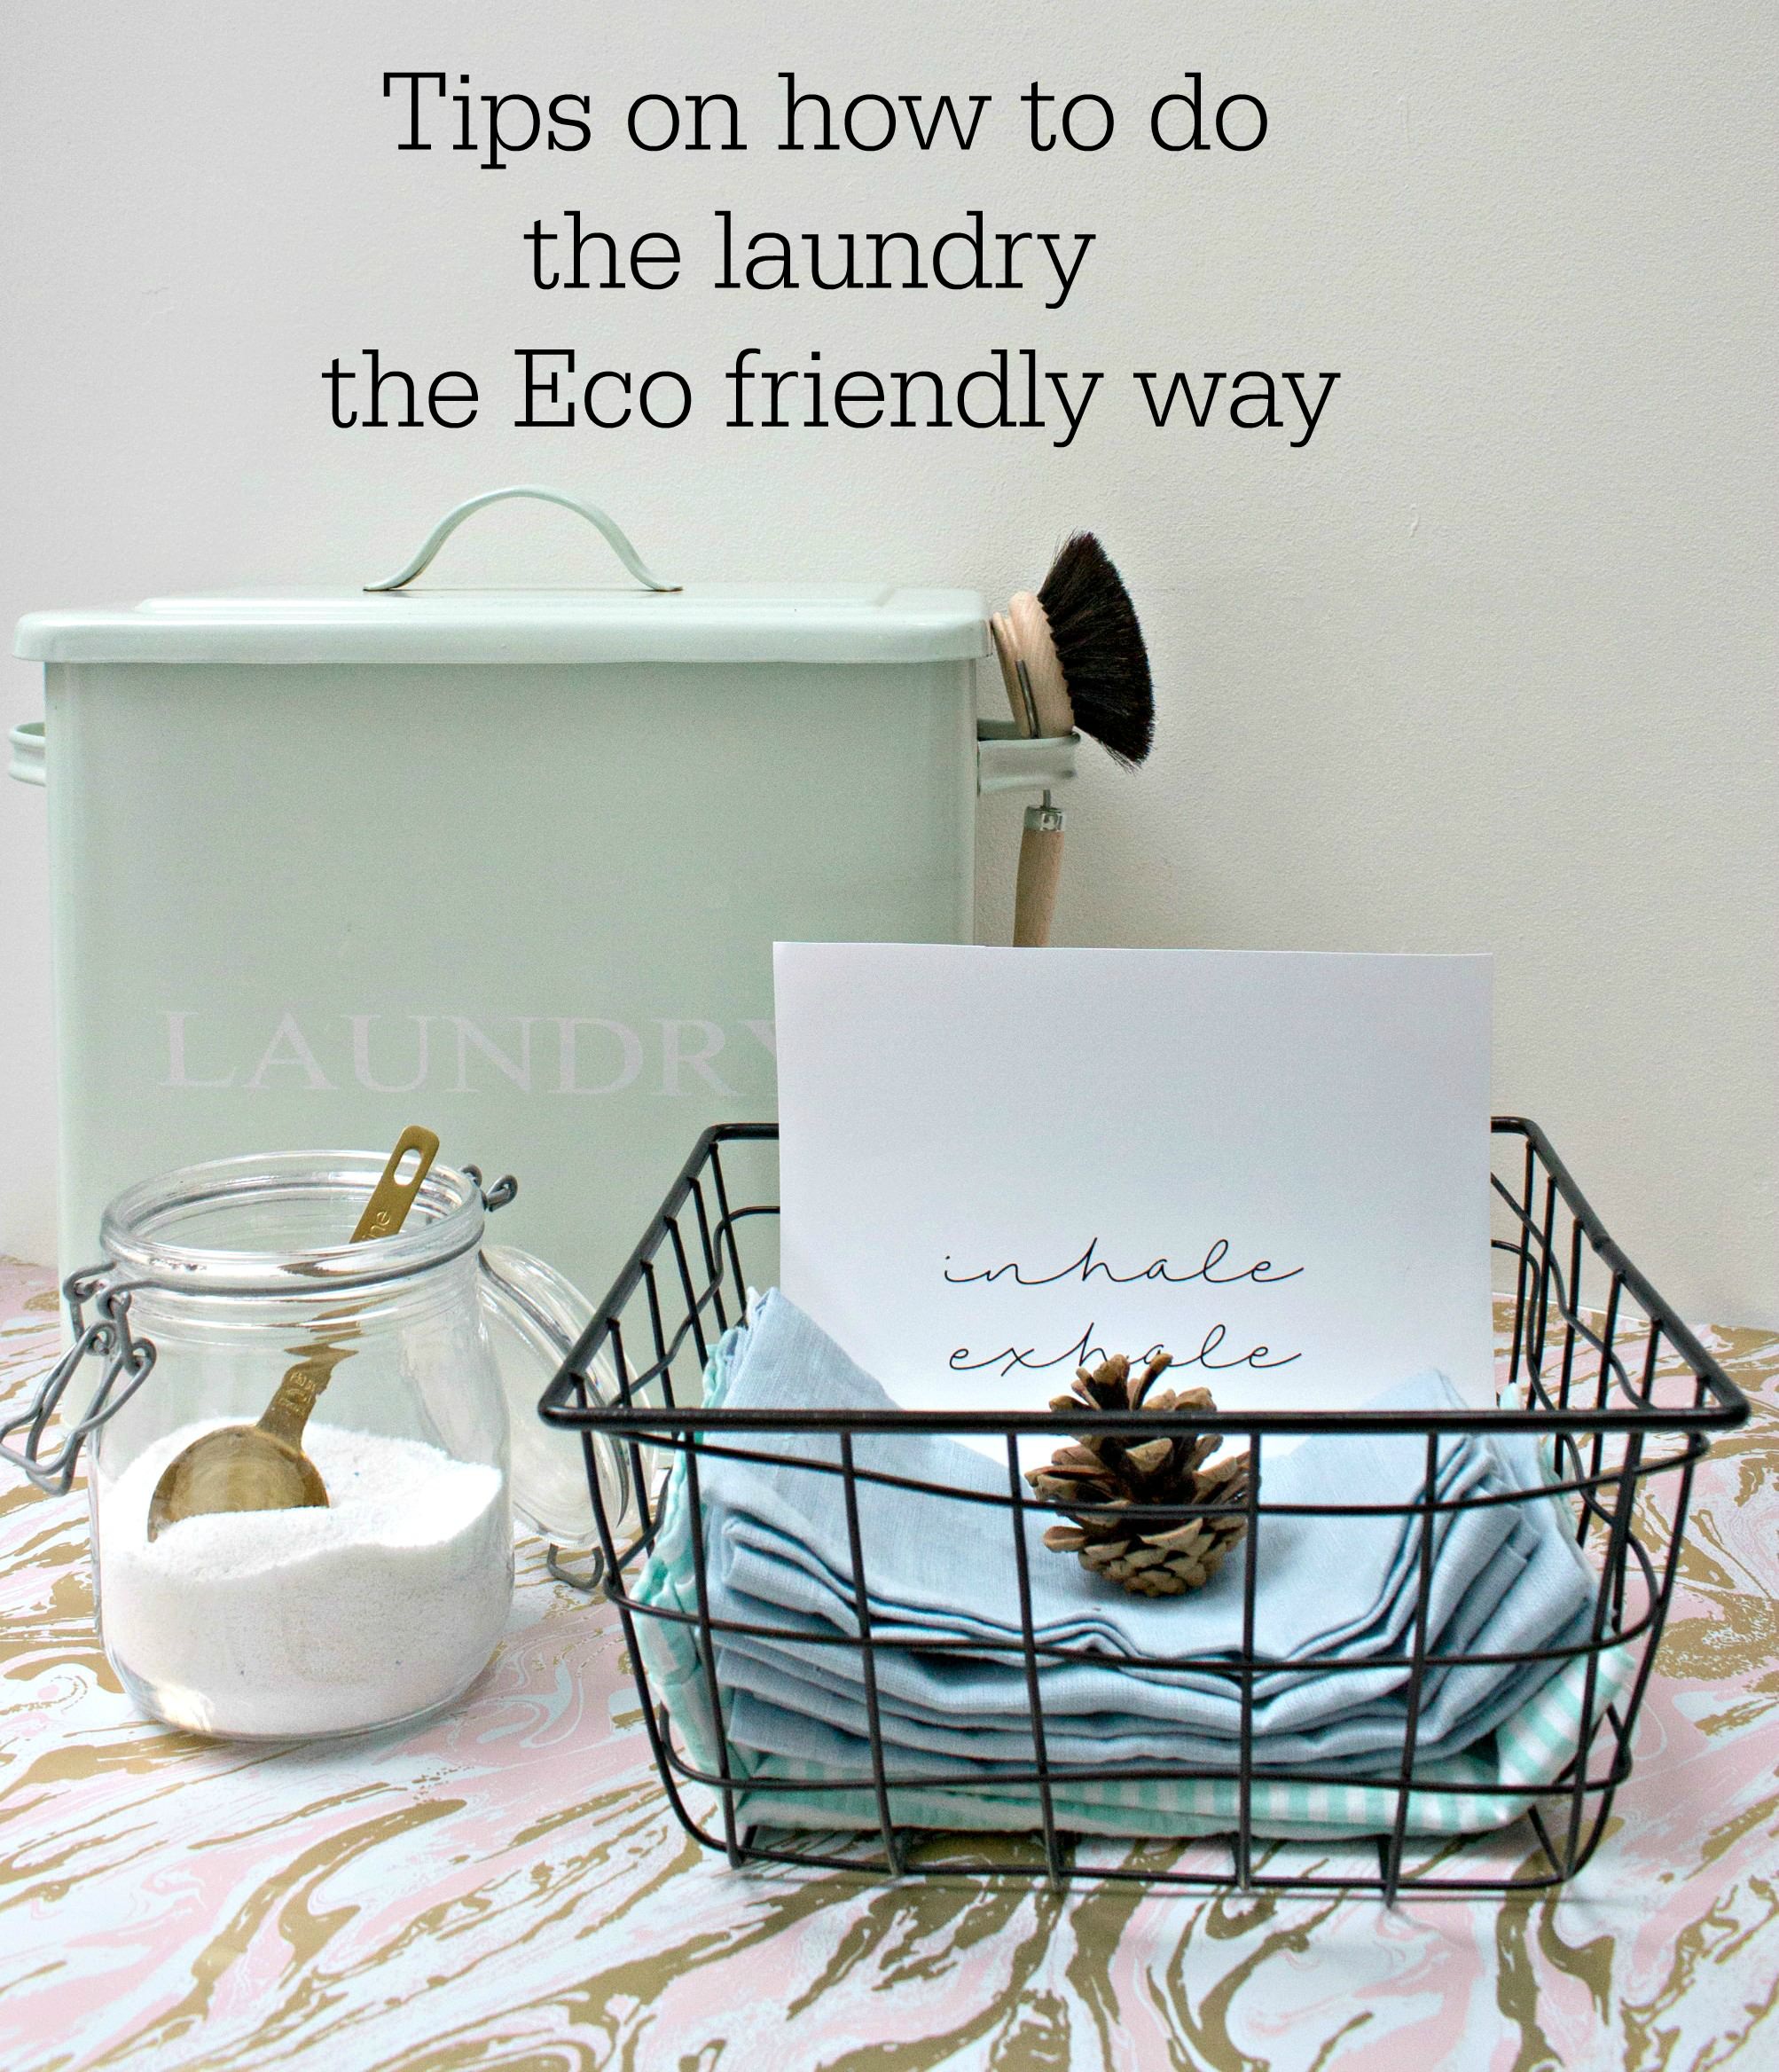 laundry-1-the-eco-friendly-way-by-little-big-bell